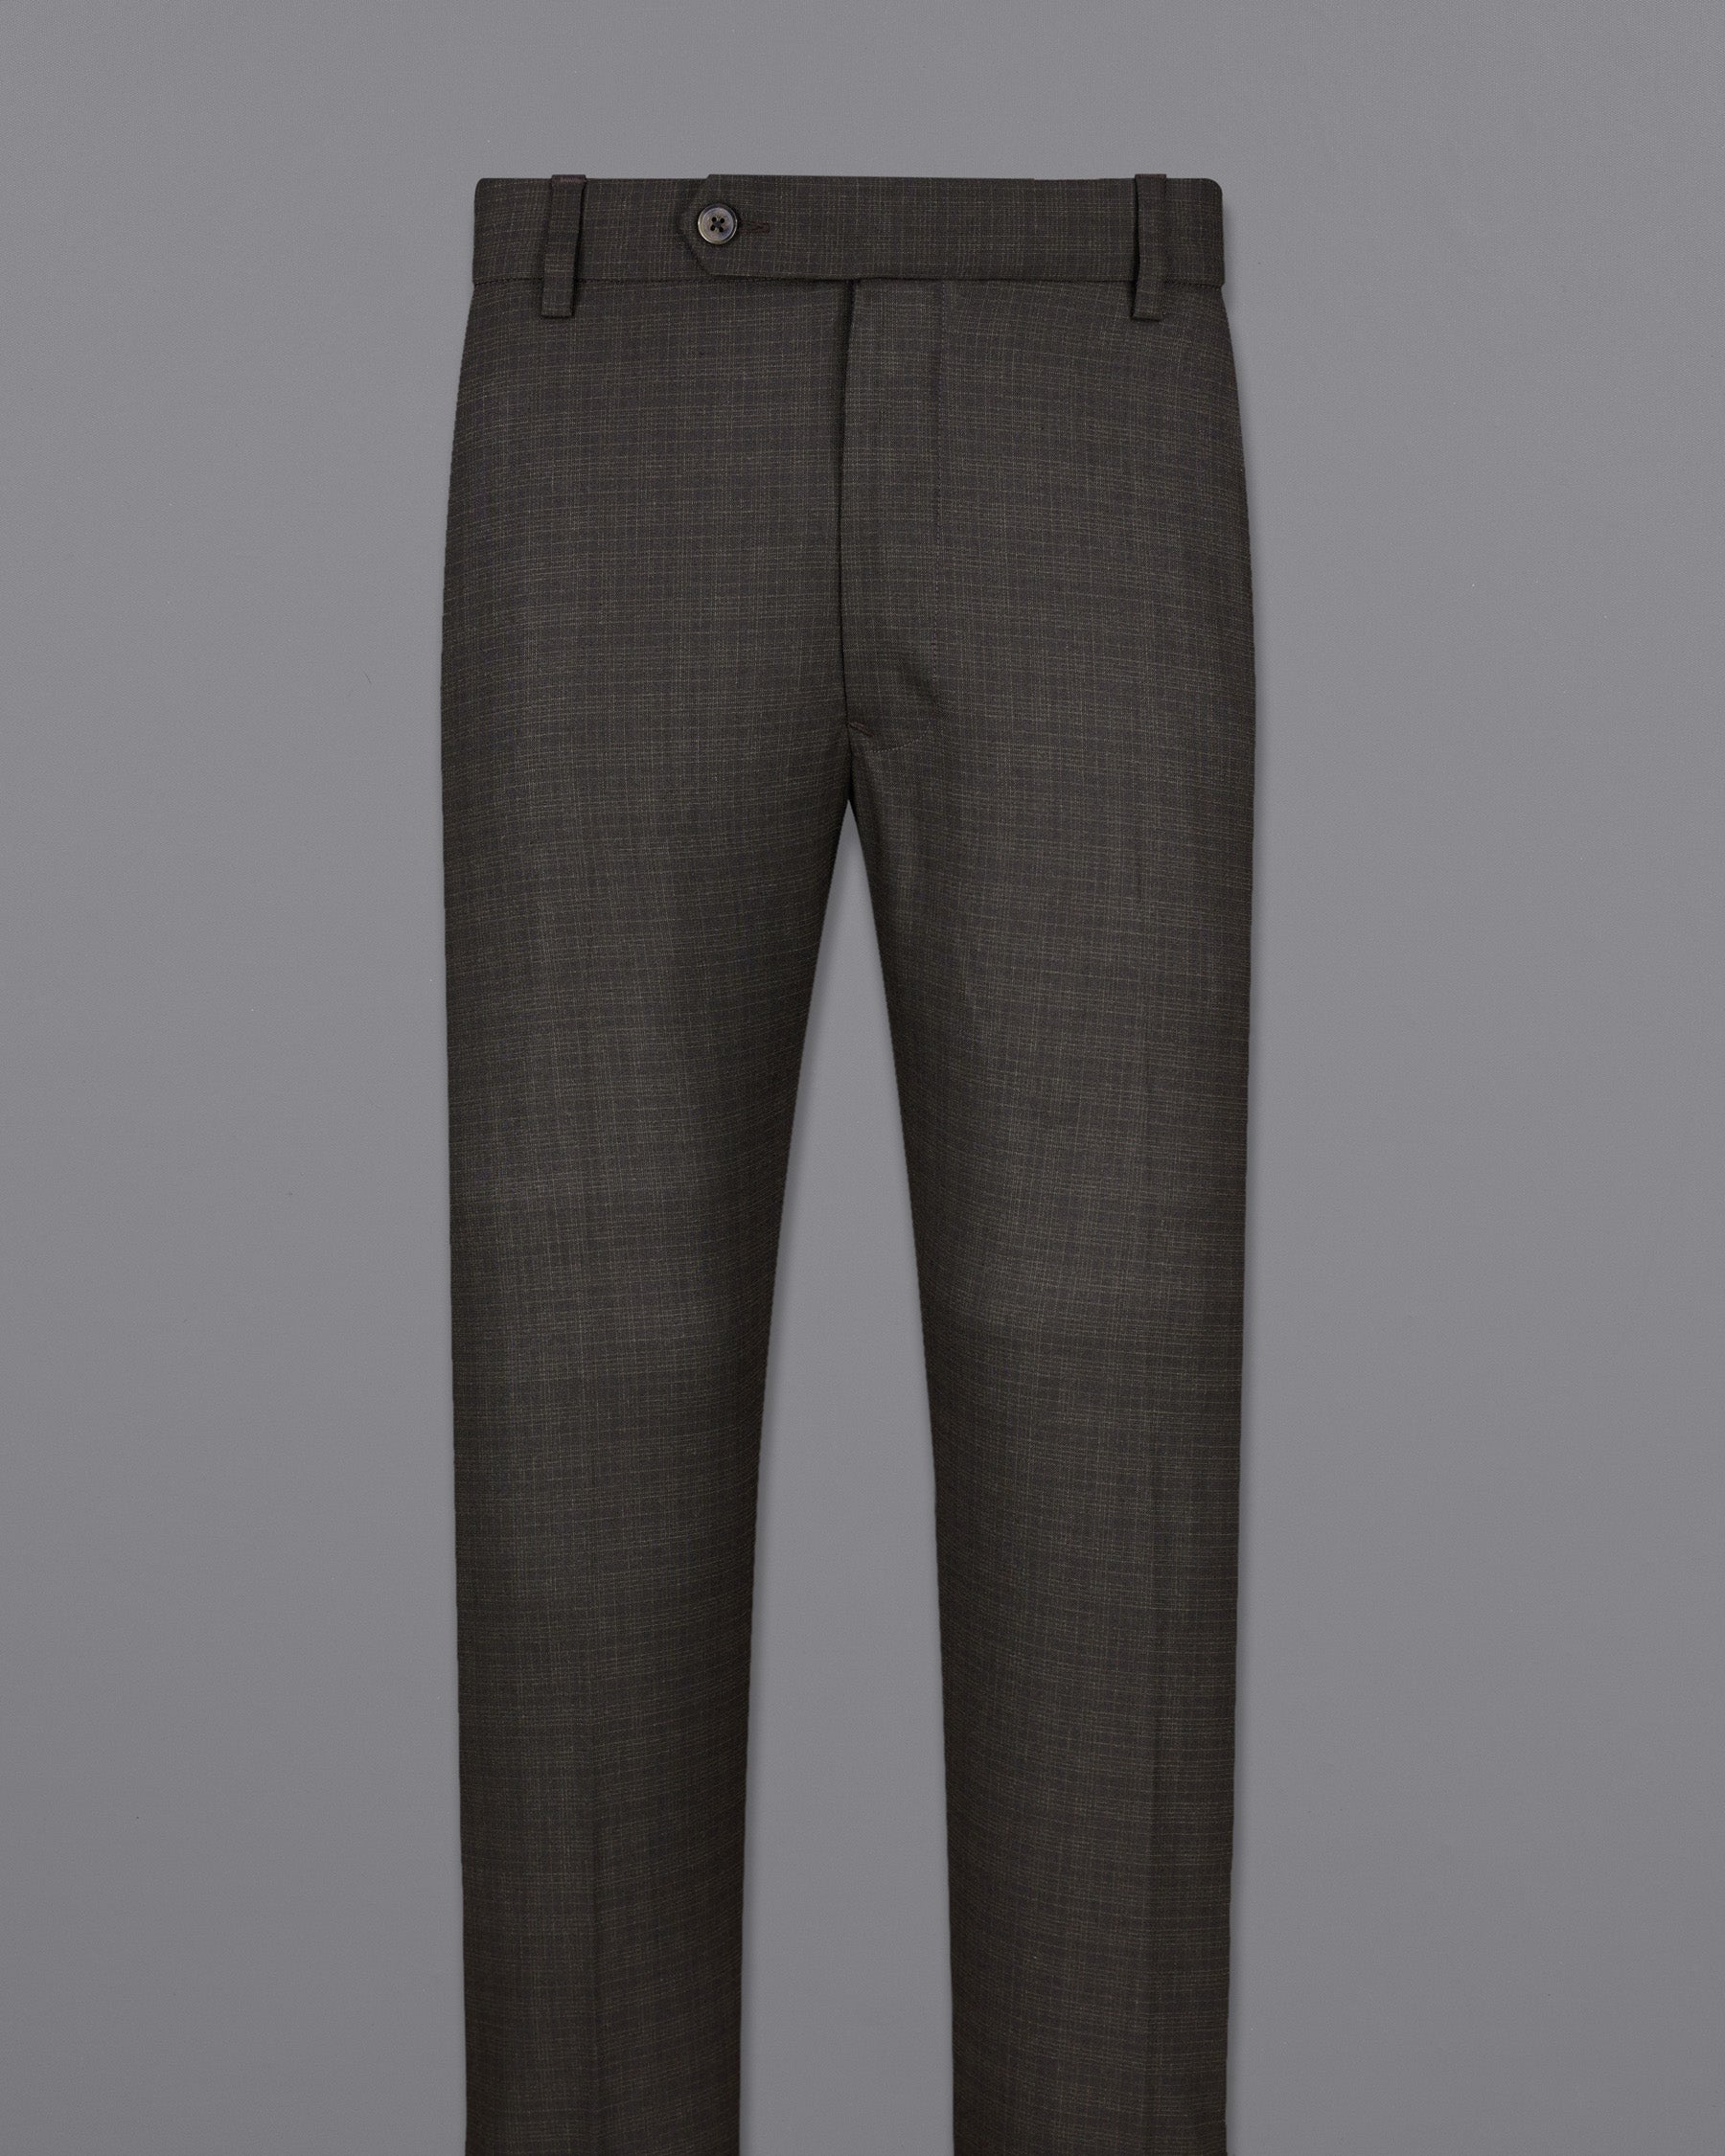 Emperor Gray with Hemlock Dark Brown Checkered Pant T2095-28, T2095-30, T2095-32, T2095-34, T2095-36, T2095-38, T2095-40, T2095-42, T2095-44